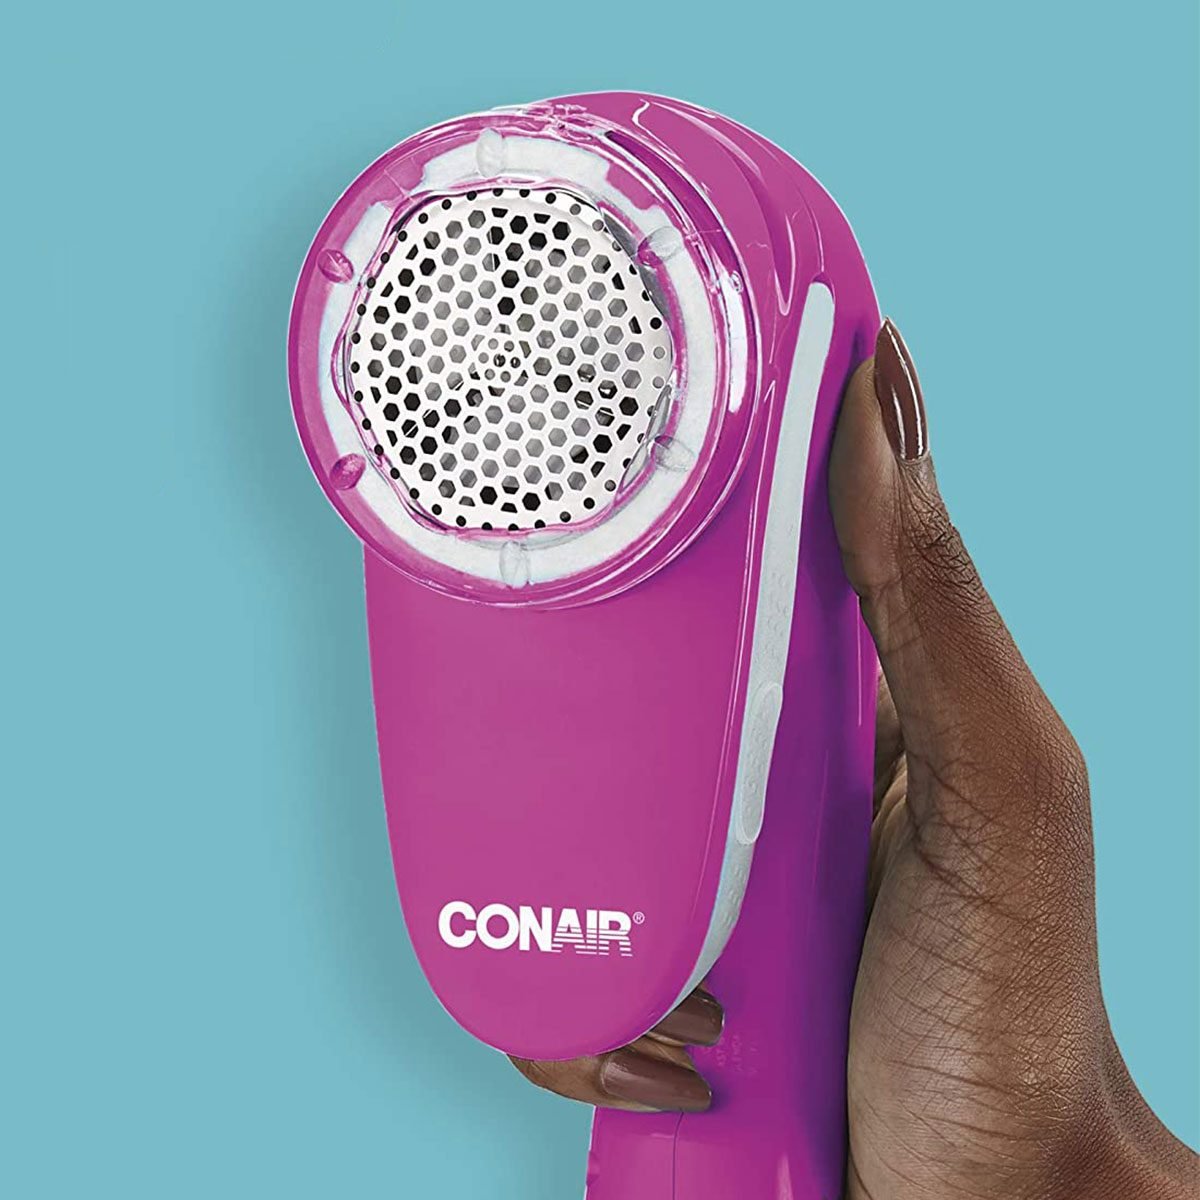 The $15 Conair Fabric Shaver for Clothes Gets Rid of Pilling and